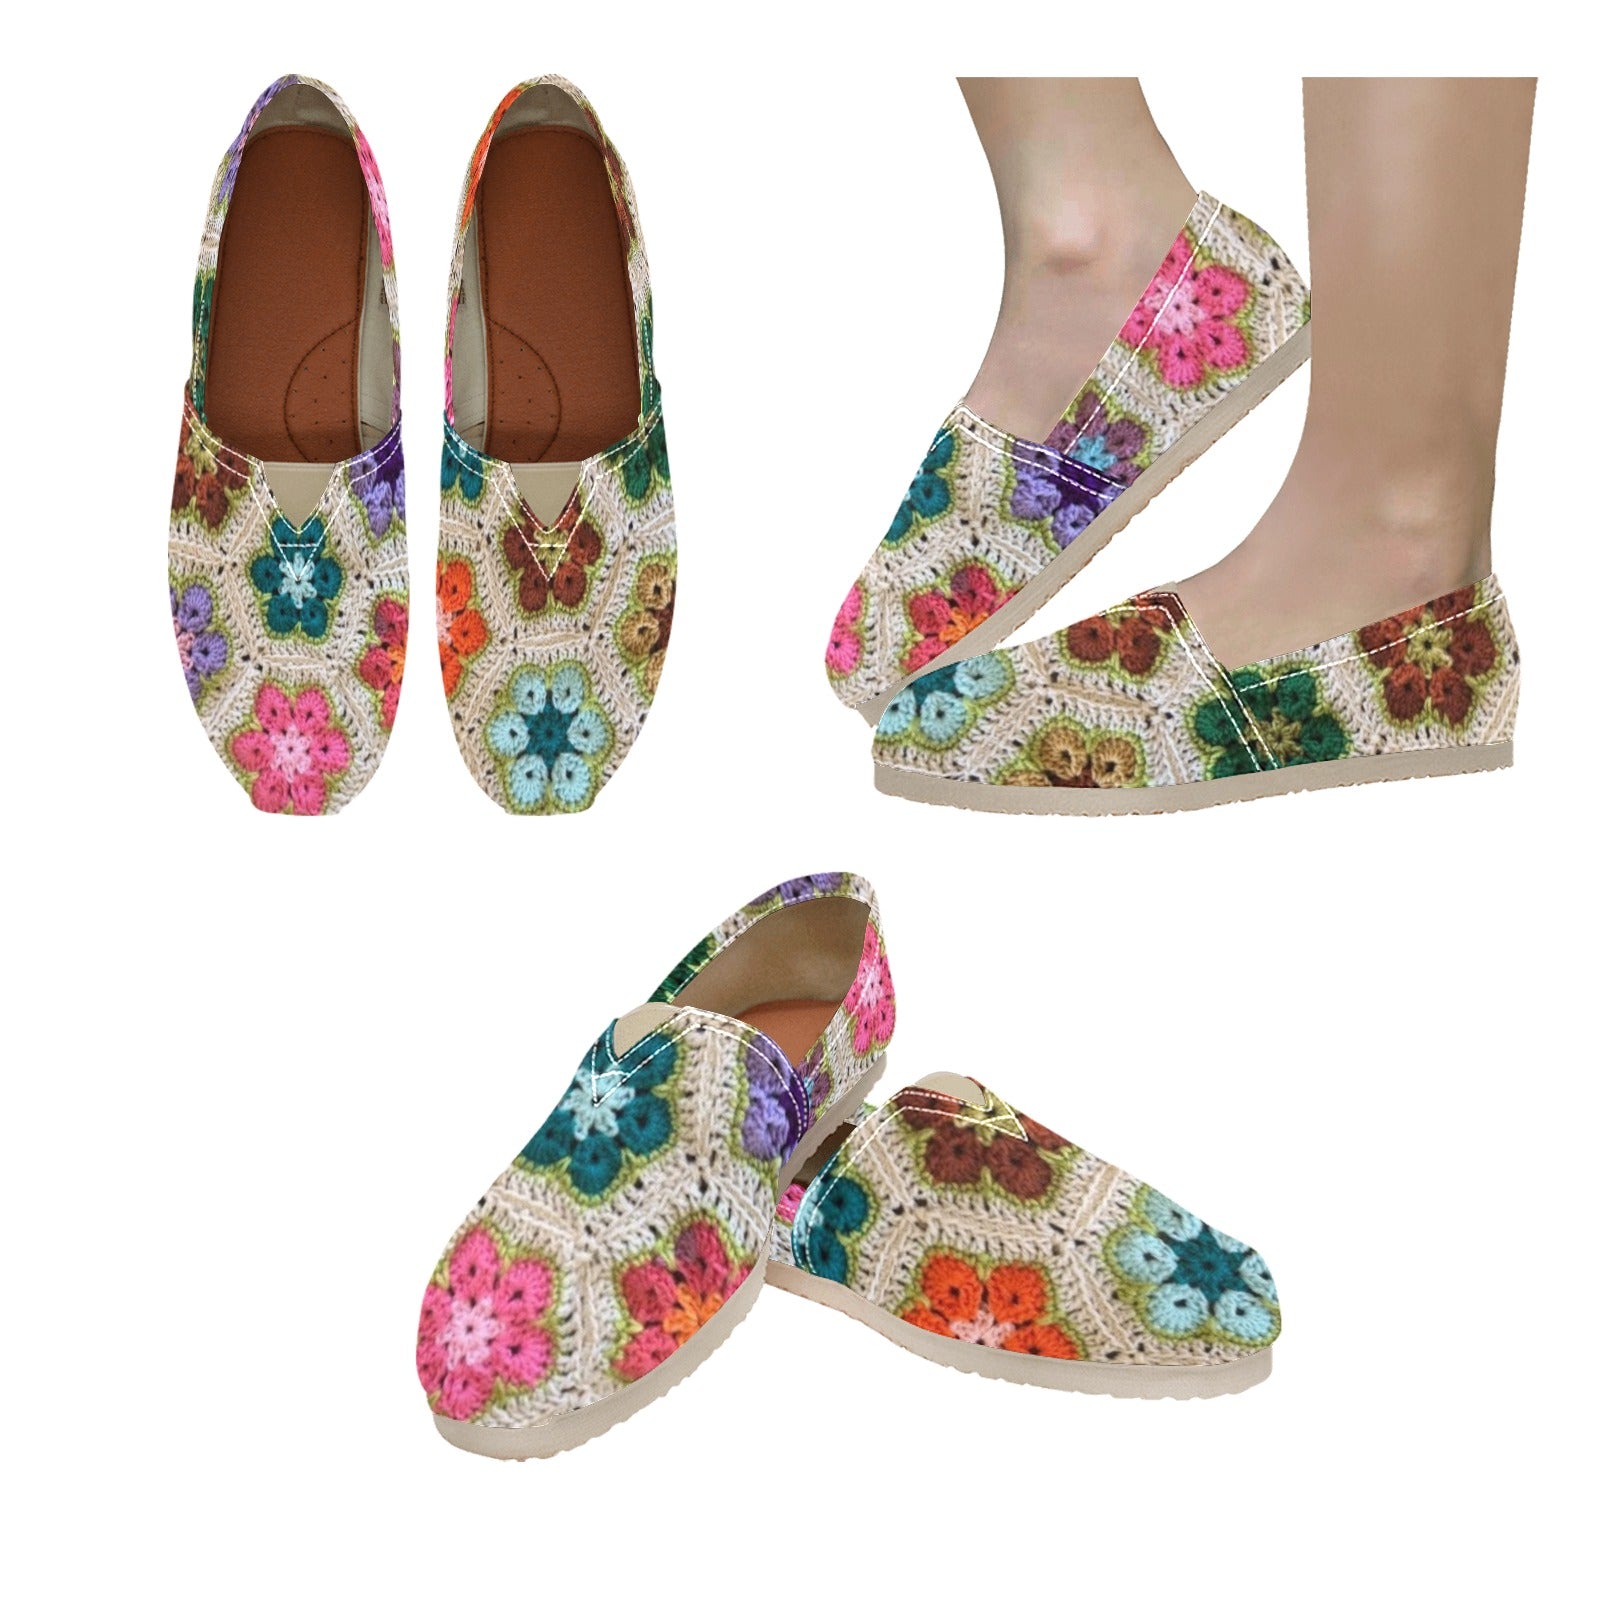 African Flowers Crochet - Casual Canvas Slip-on Shoes